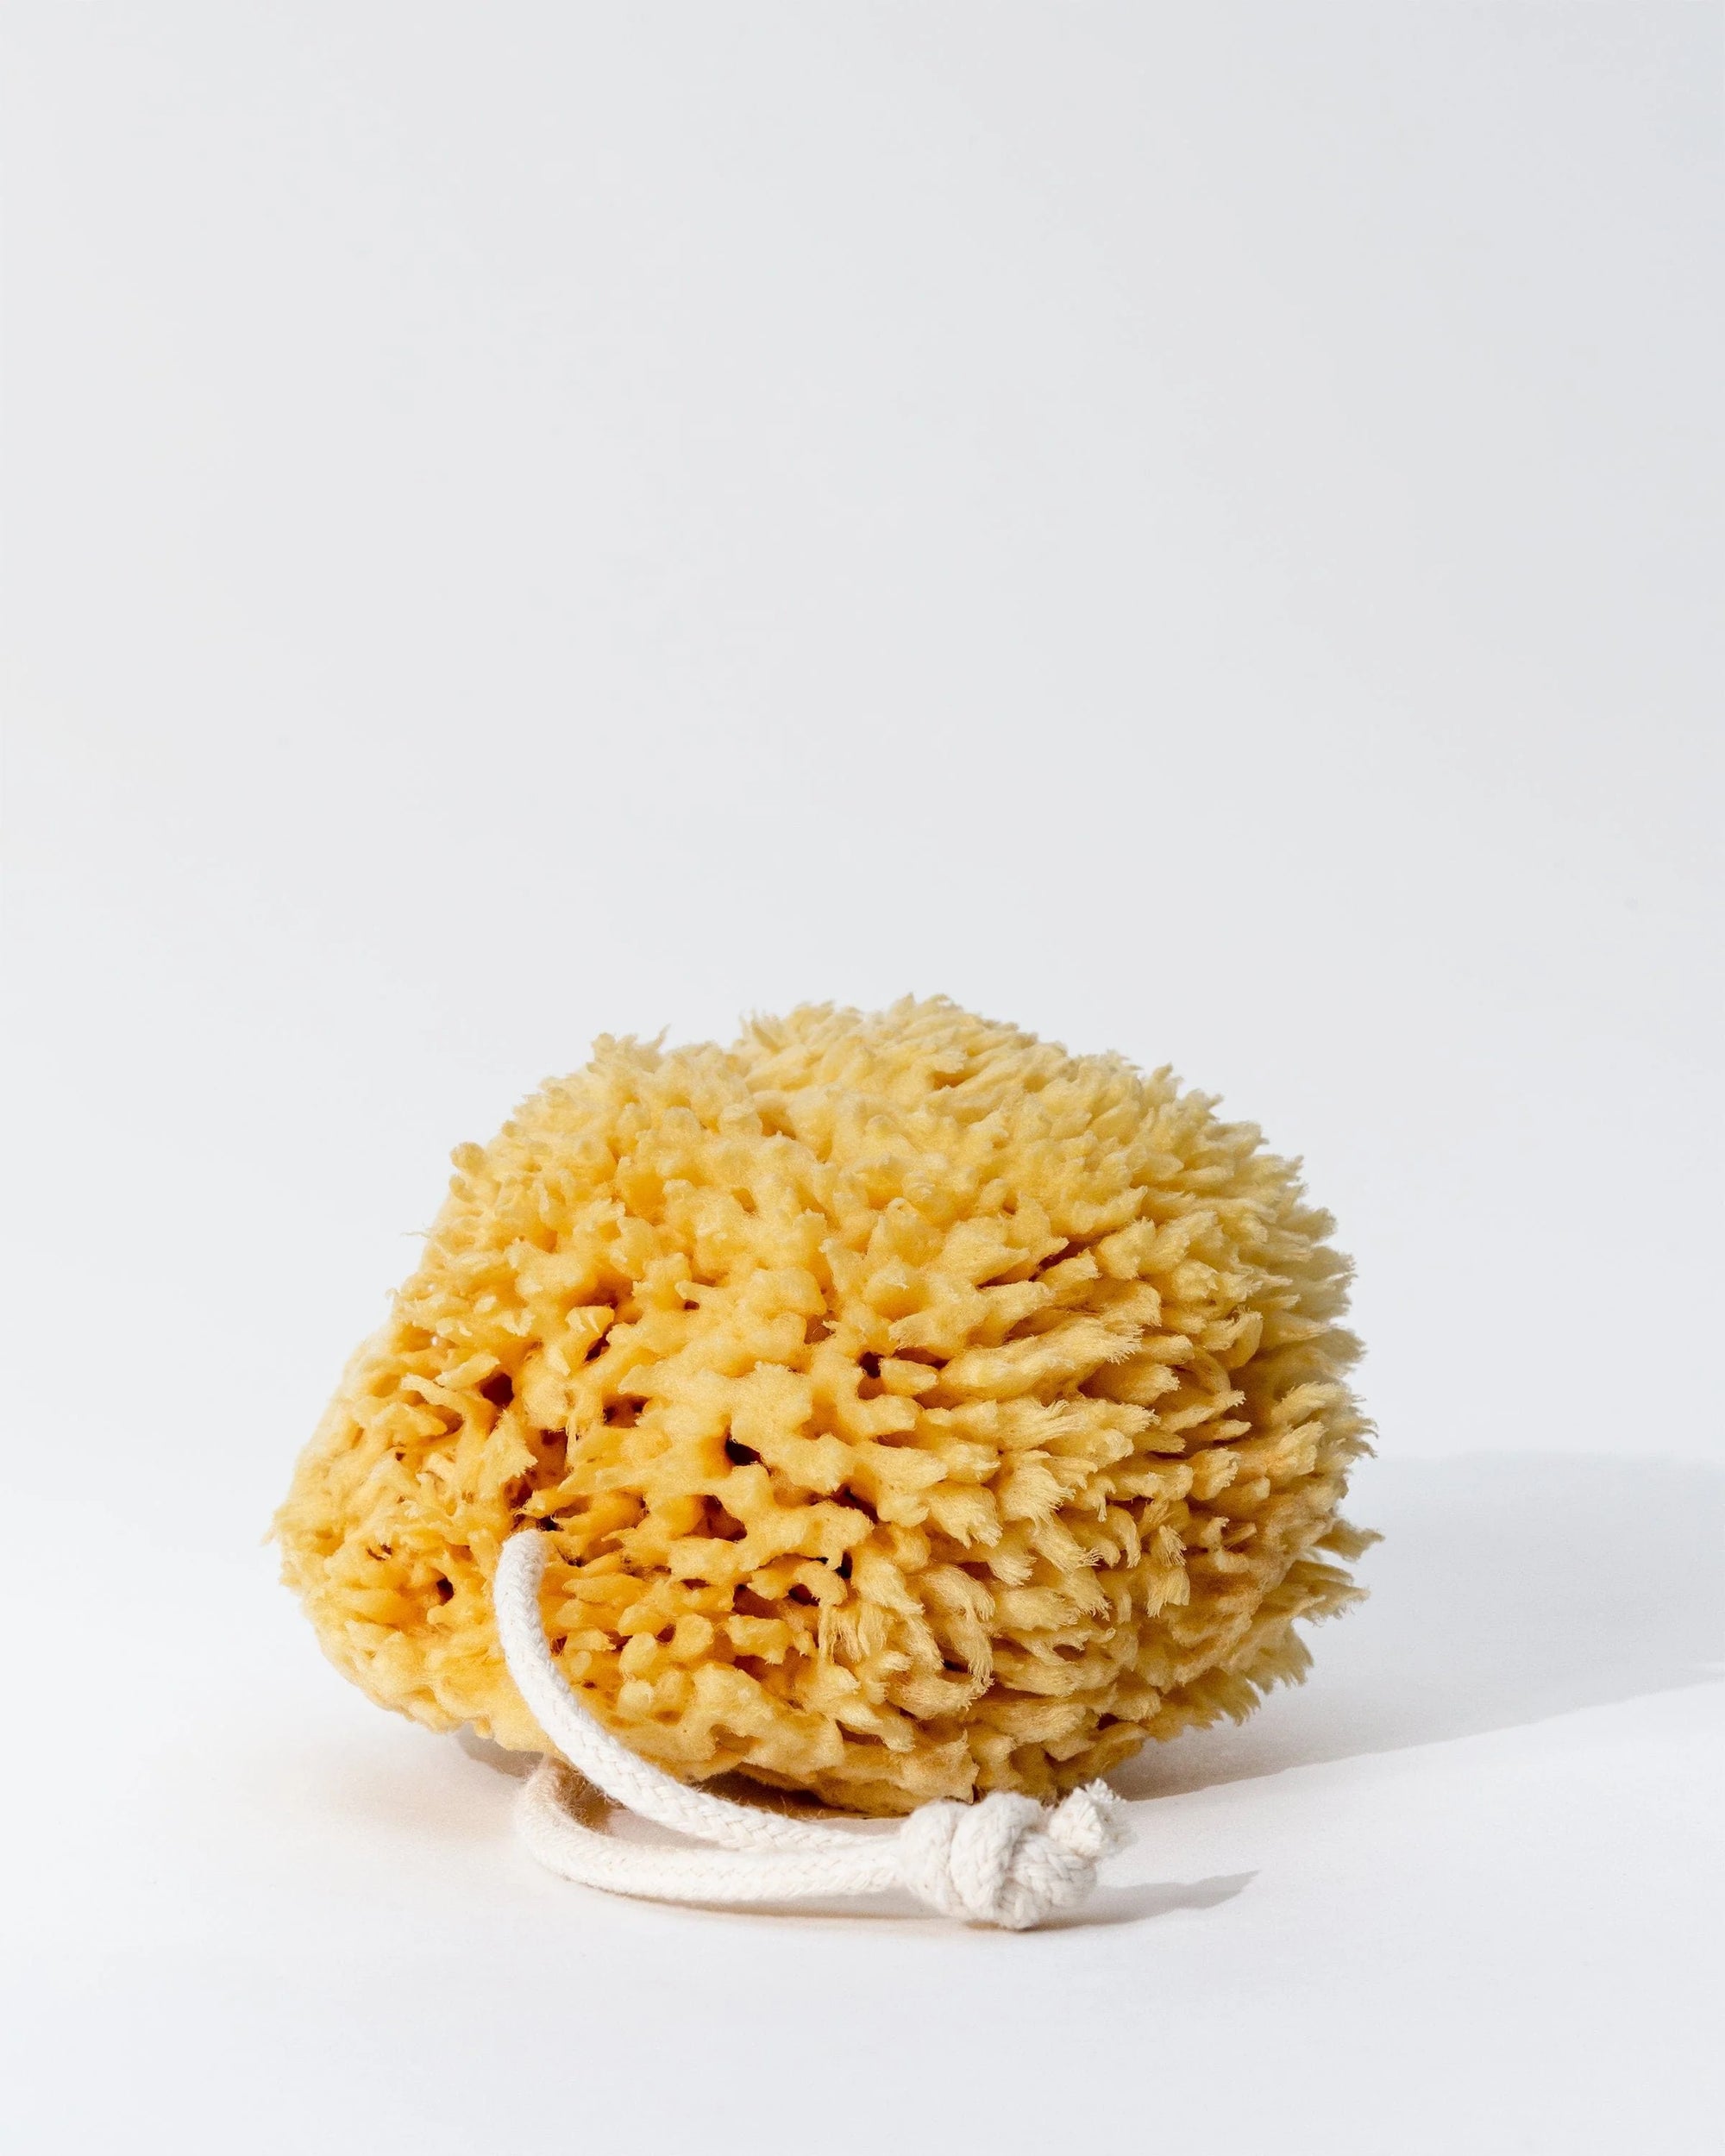 FIRSTHAND SUPPLY SEA WOOL SPONGE